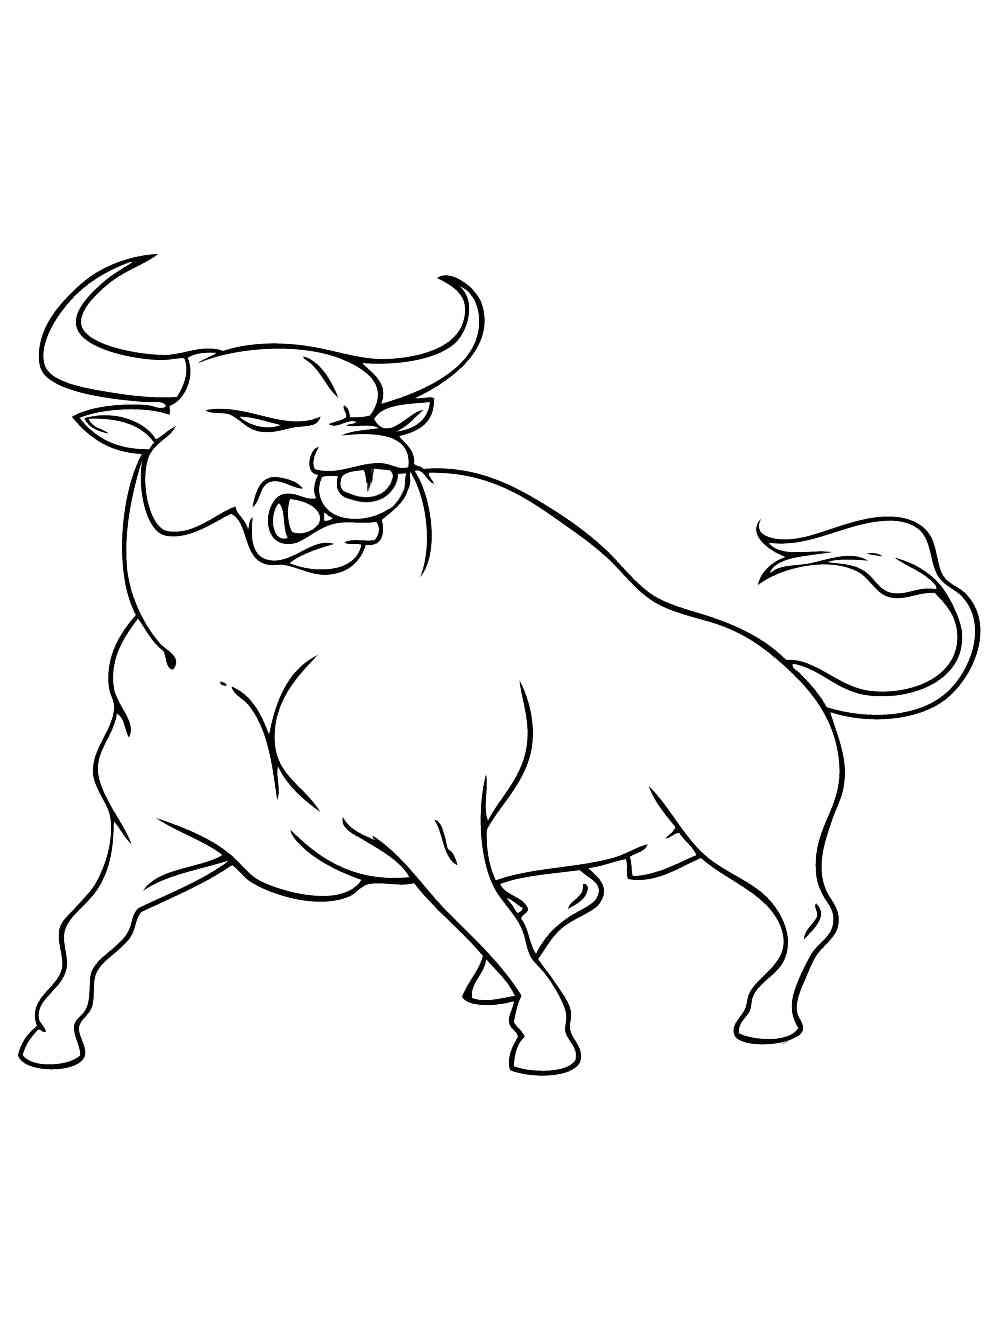 Huge Ox coloring page